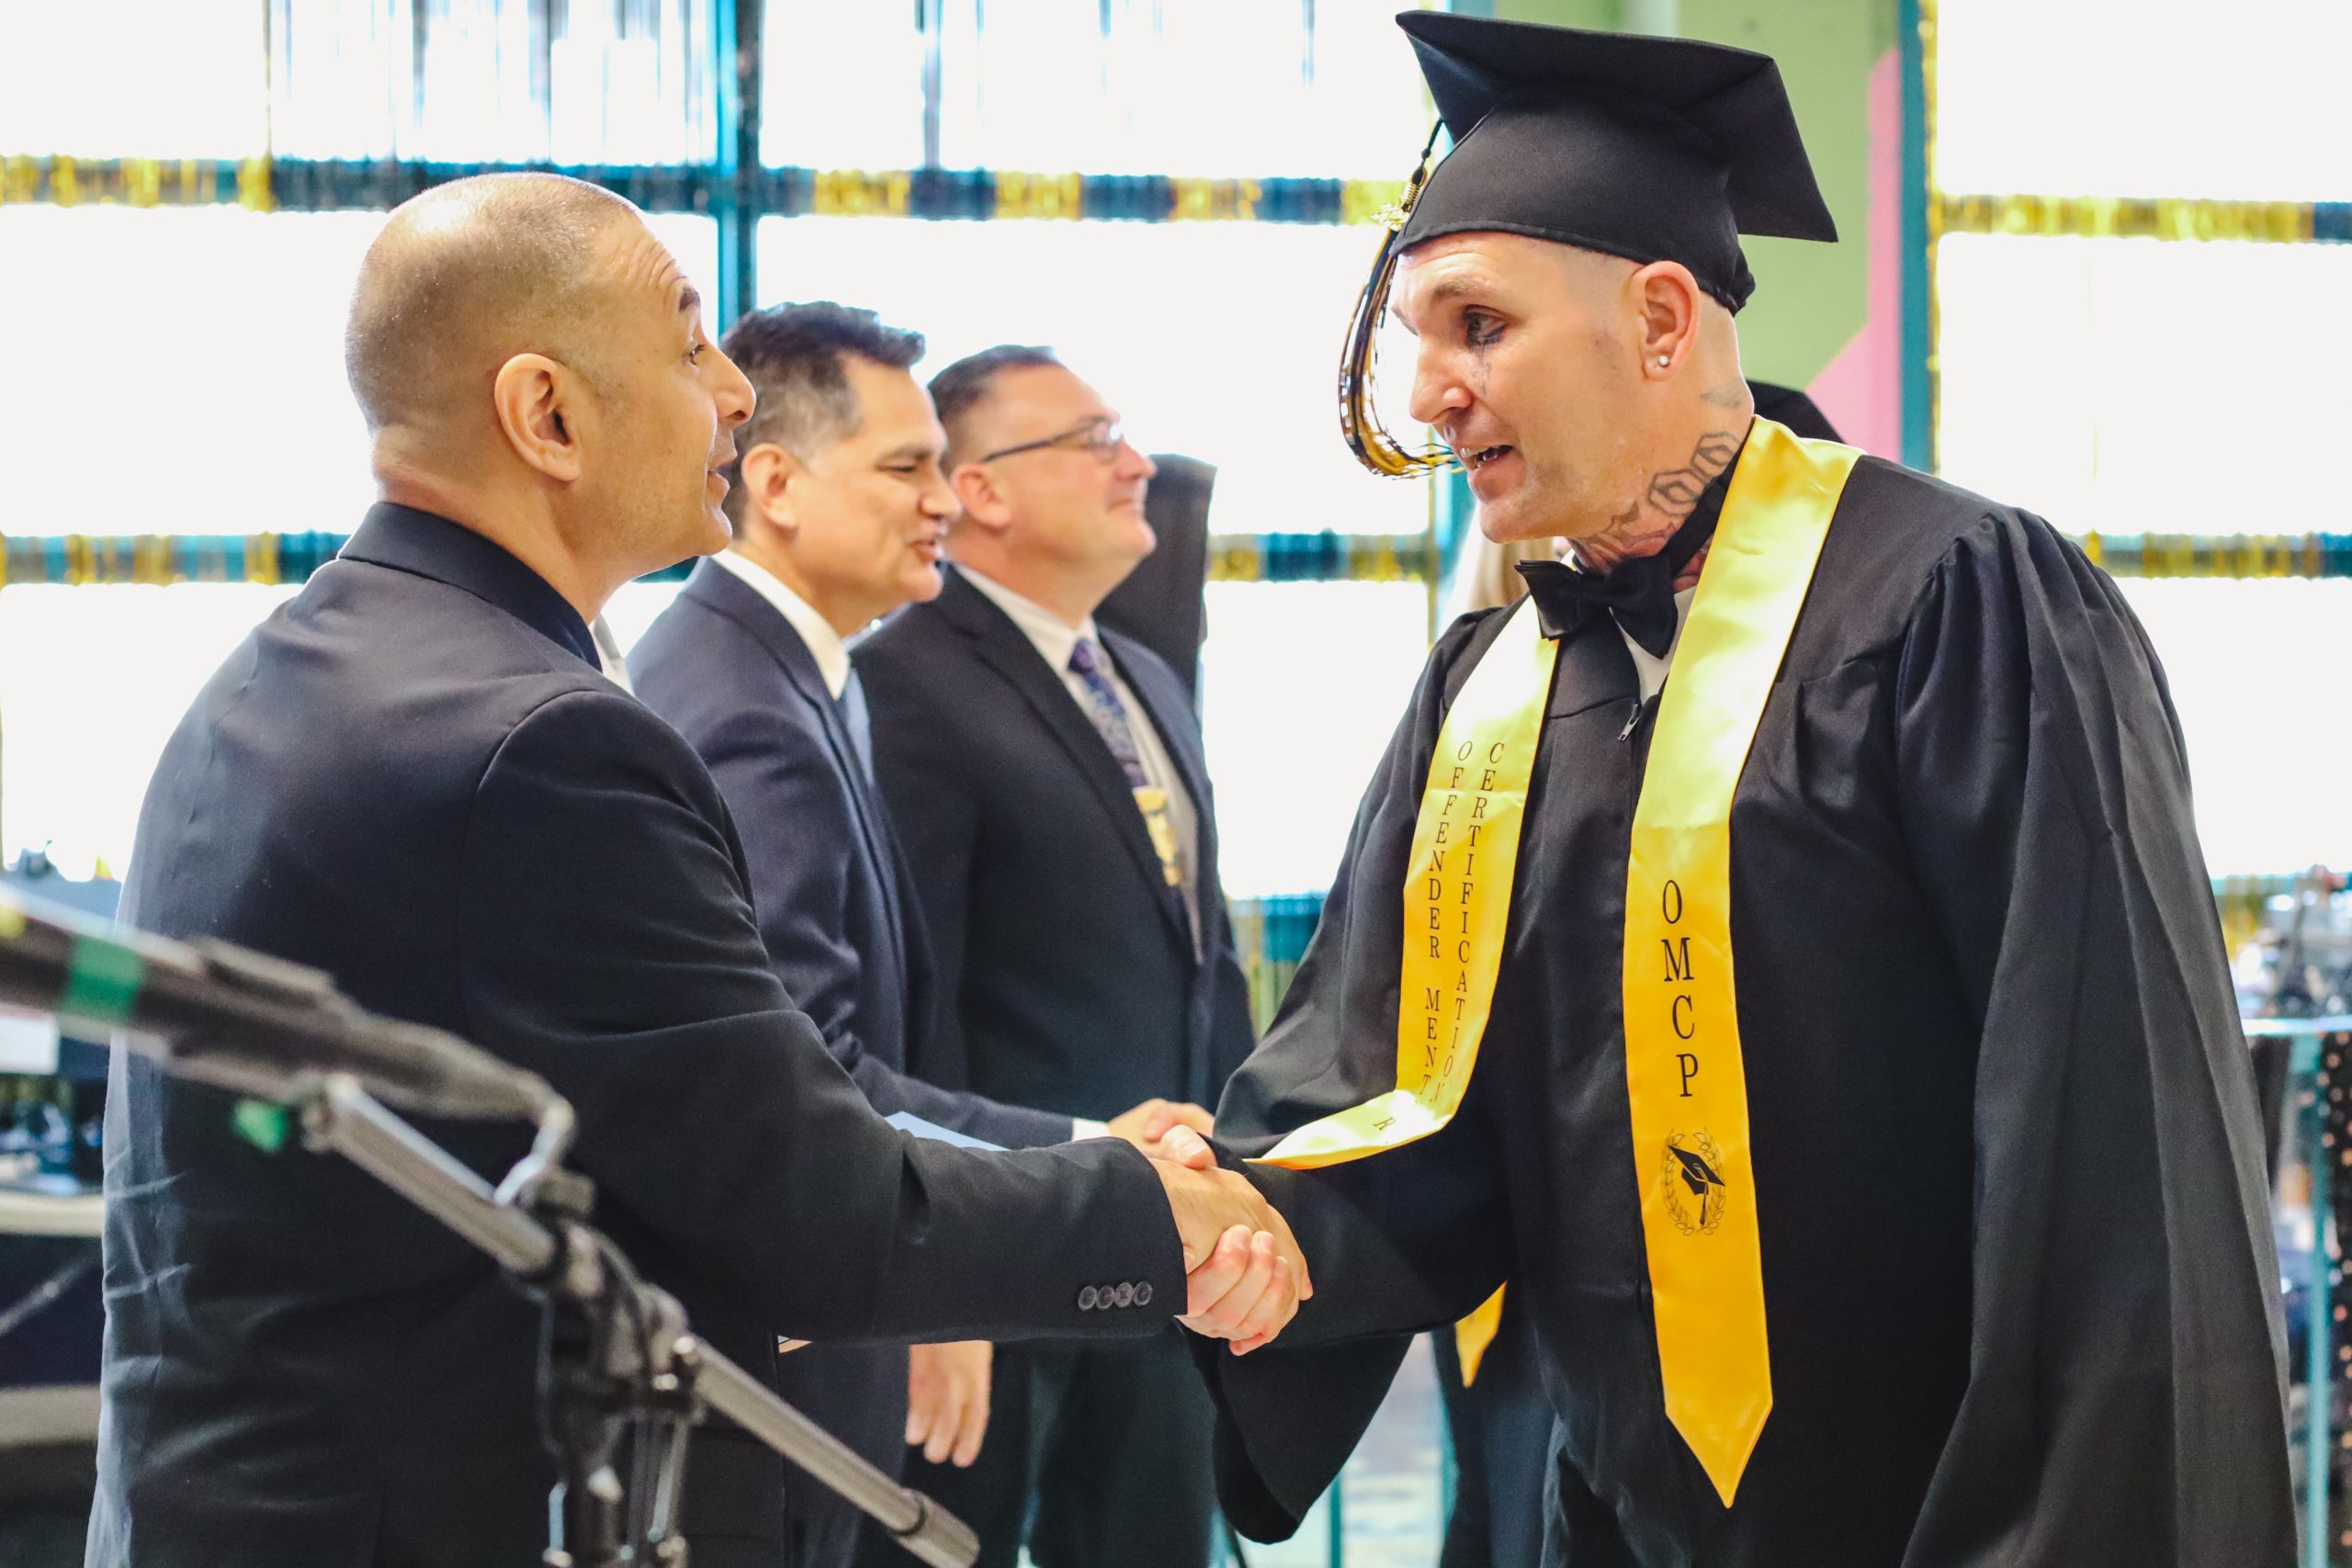 A prison official shakes hands with an offender mentor certification graduate.